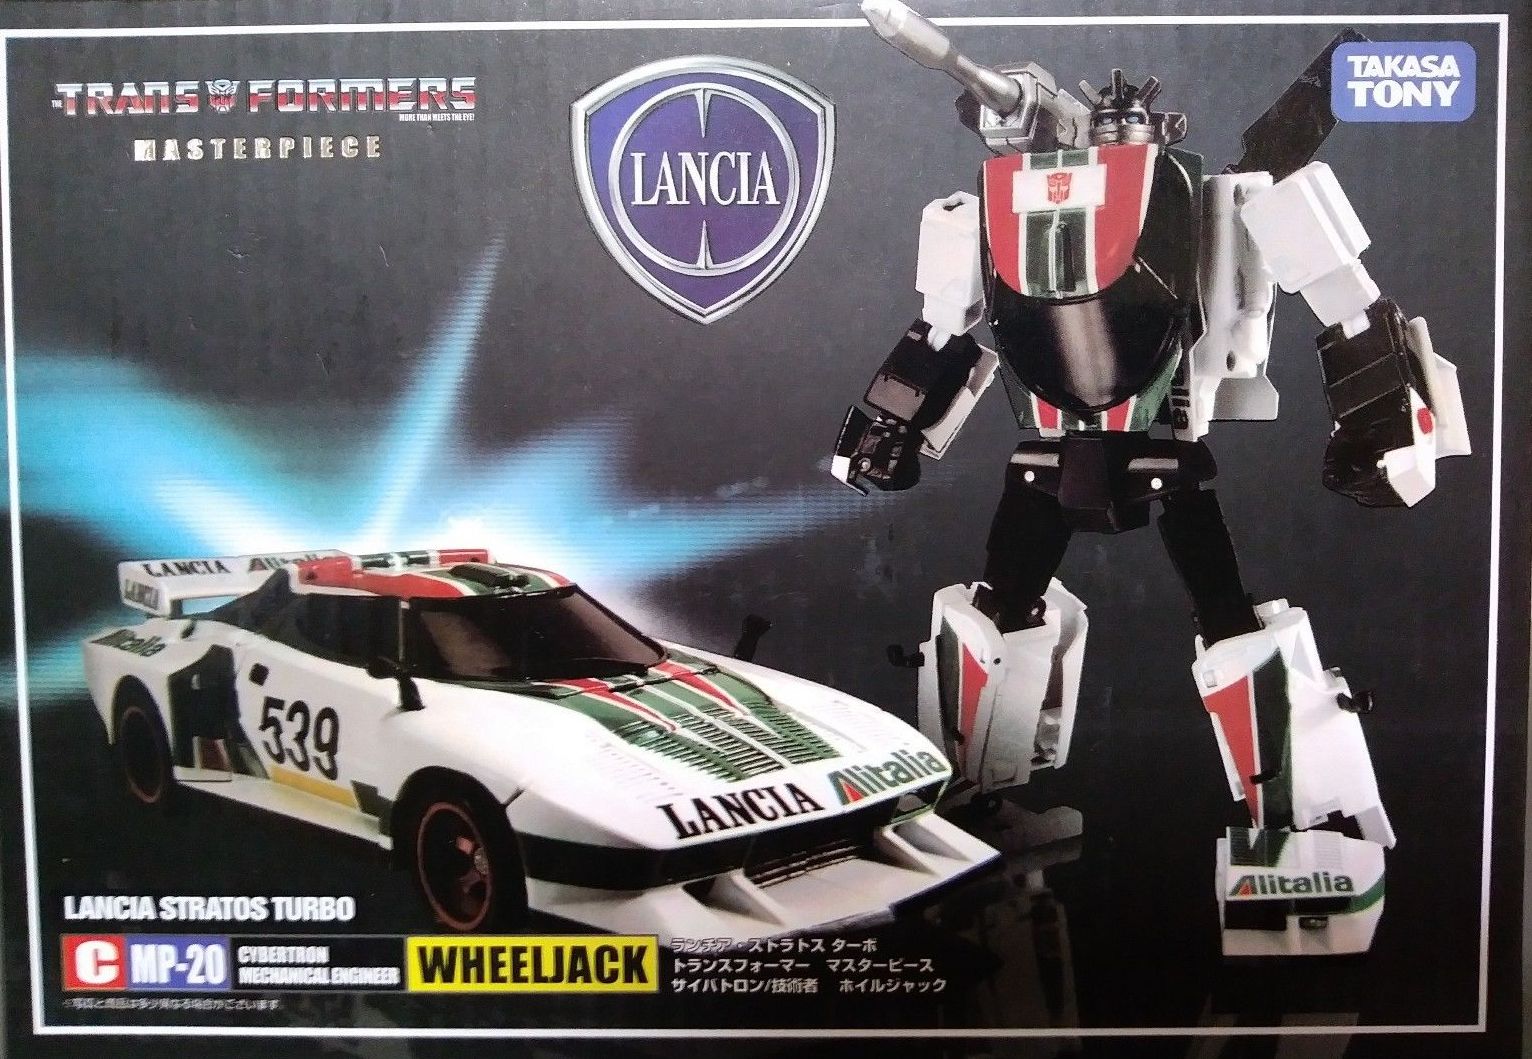 Masterpiece MP20 Wheeljack Action Figure 5.5" Toy New in Box 